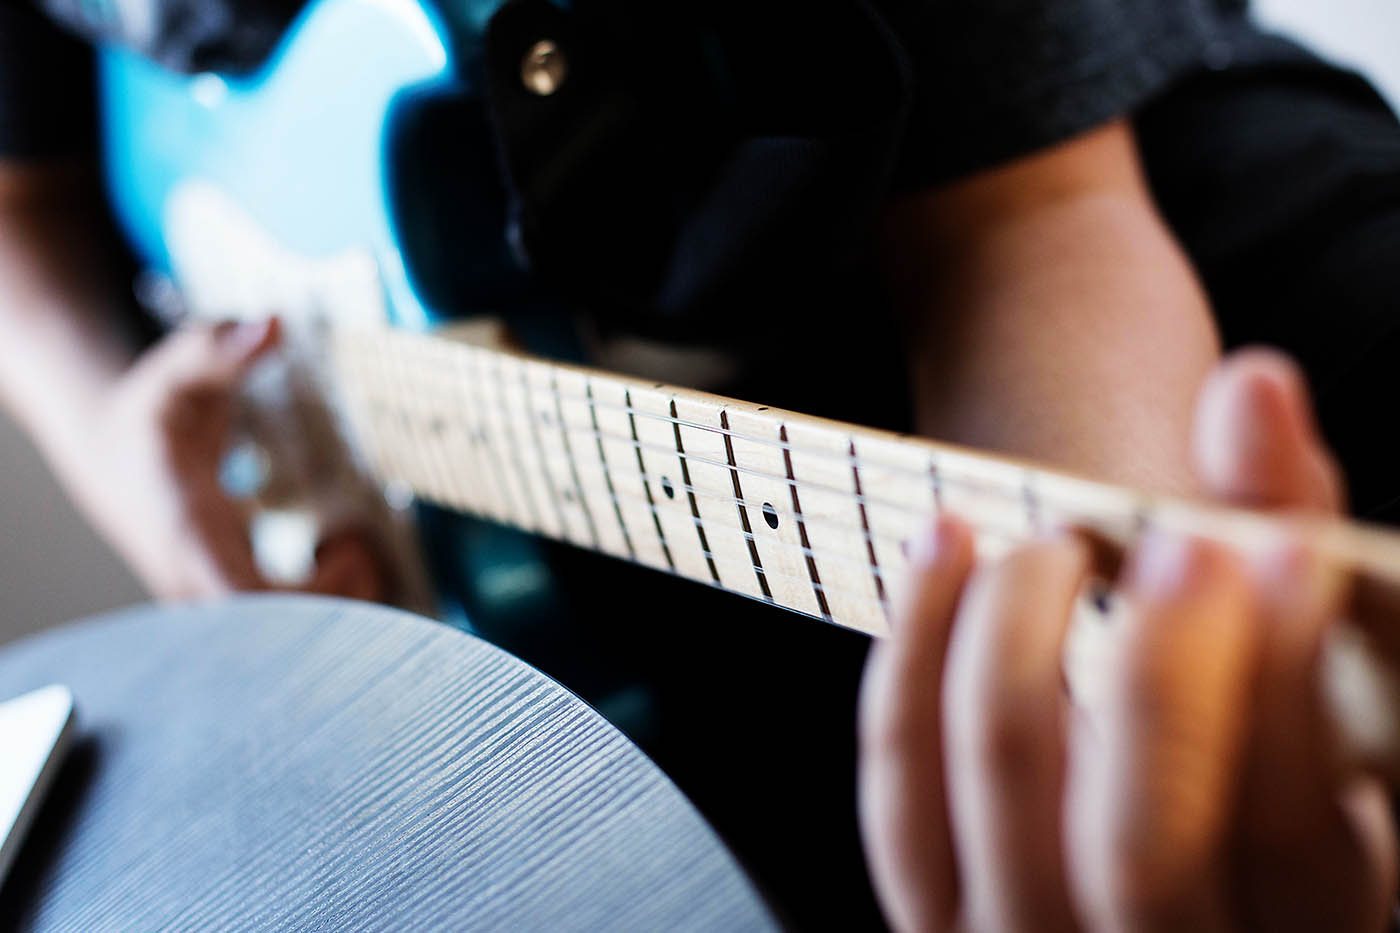 Gift of experience ideas - online guitar lessons with Fender Play AND a guitar giveaway!